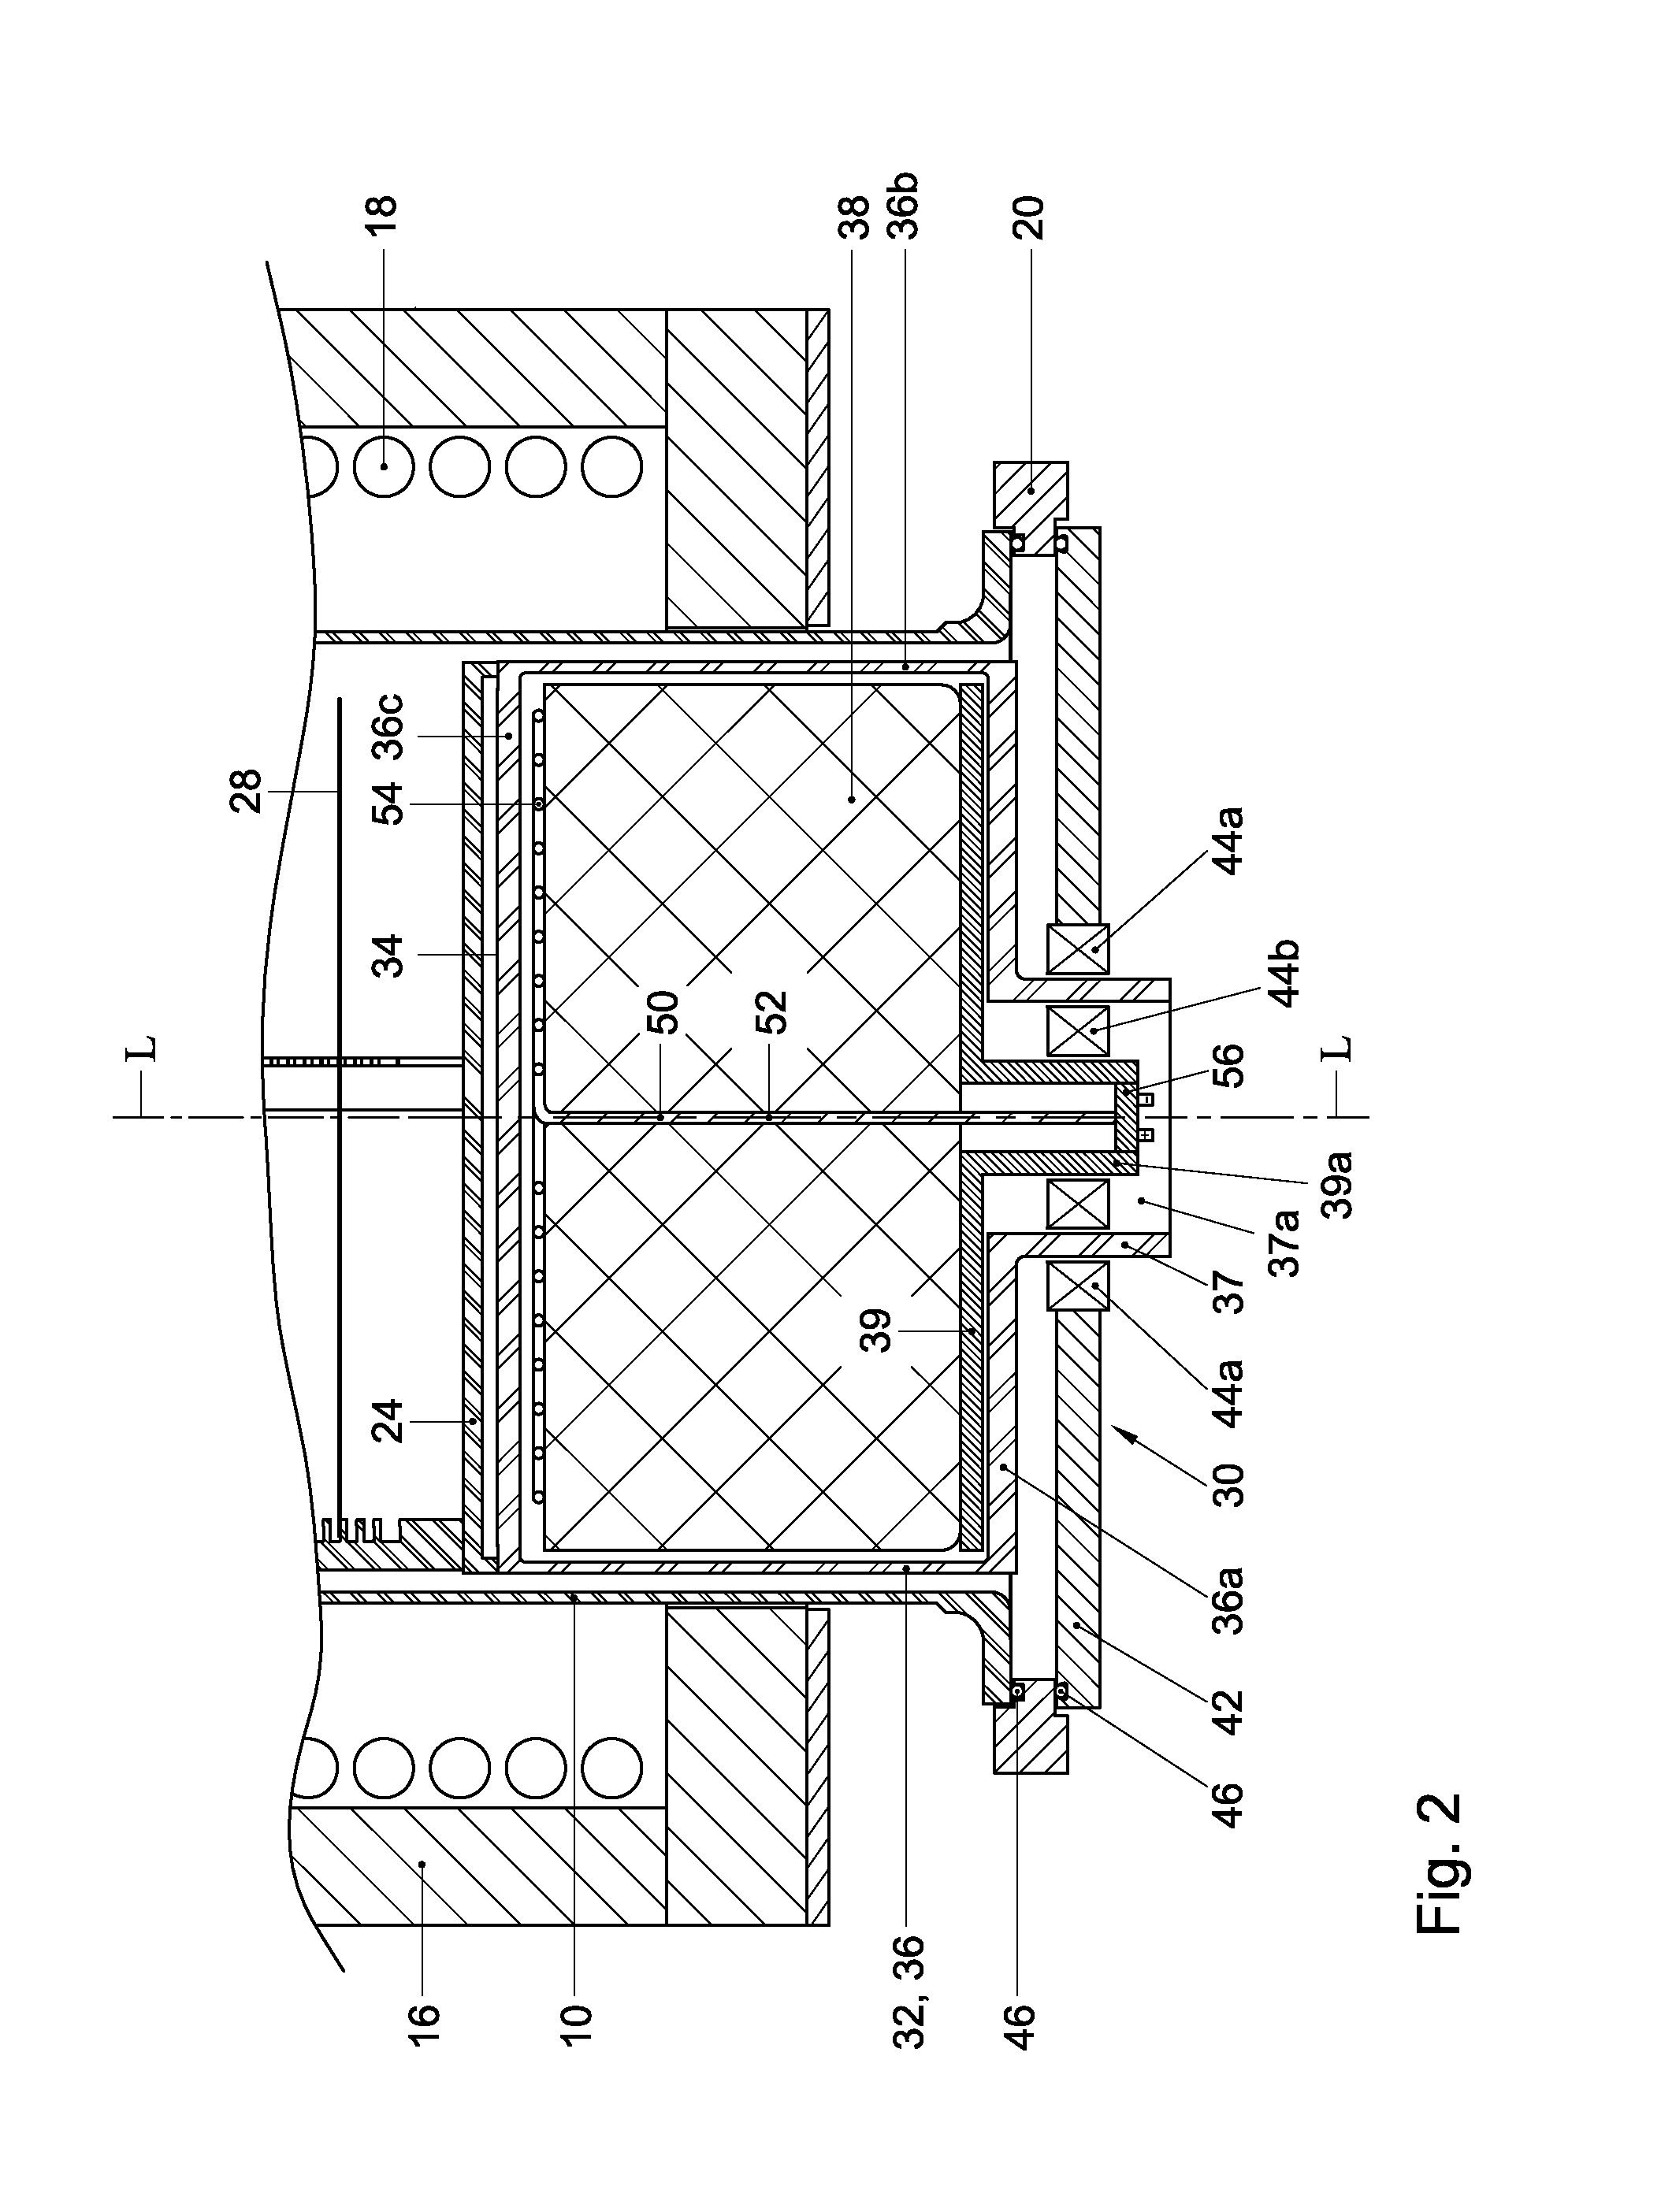 Wafer processing apparatus with heated, rotating substrate support